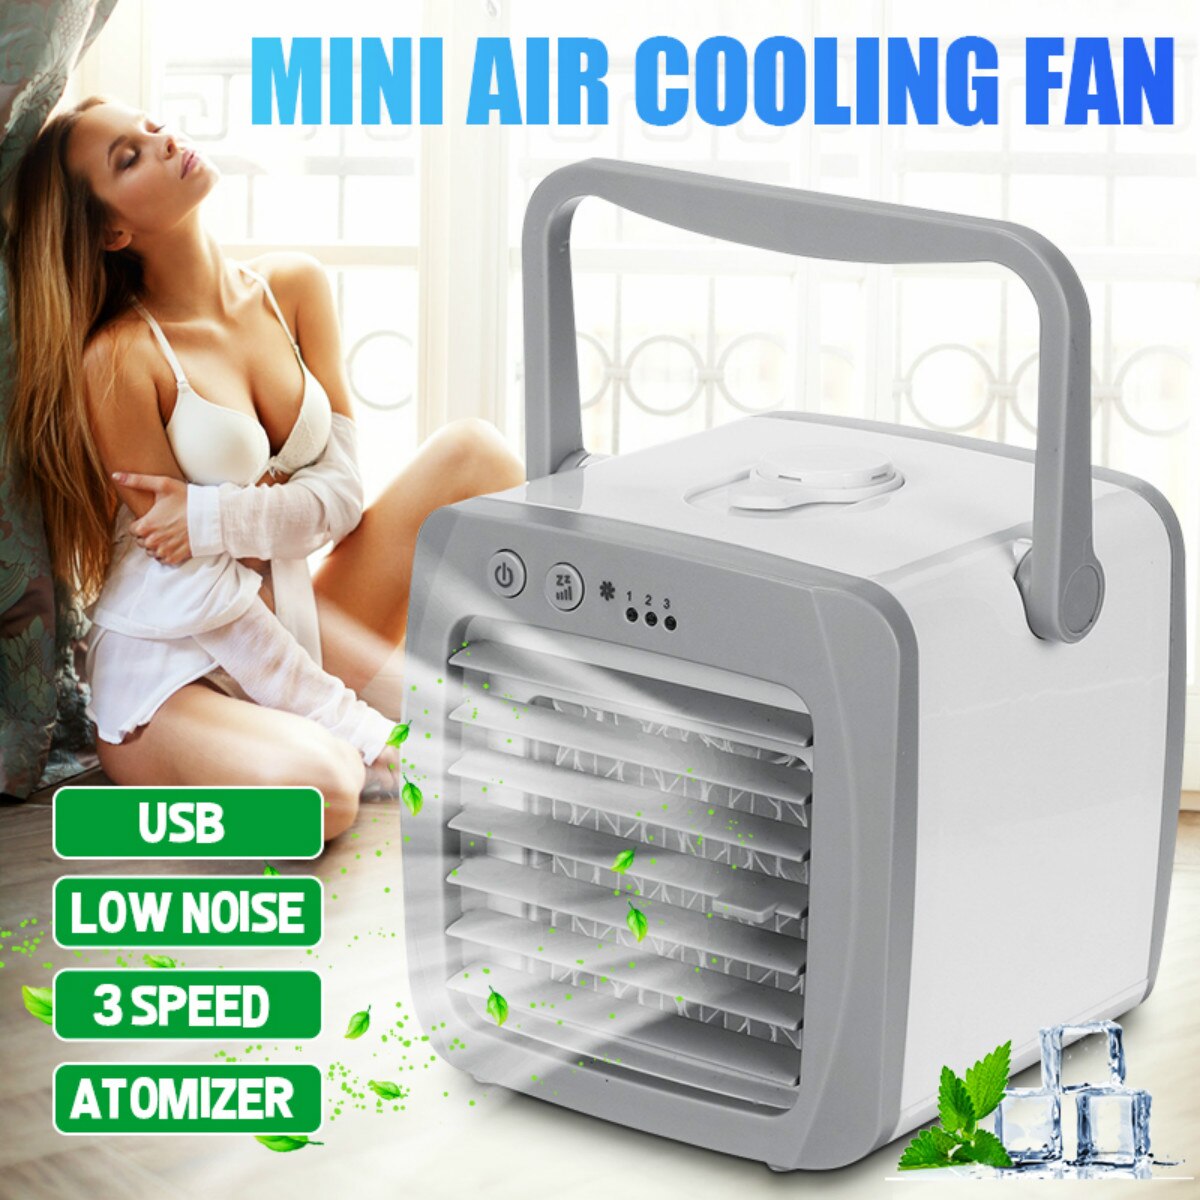 Mini Portable Air Conditioner 3Speed Air Conditioning Humidifier Purifier USB Desktop Air Cooler Fan Cooling Fan For Home Office